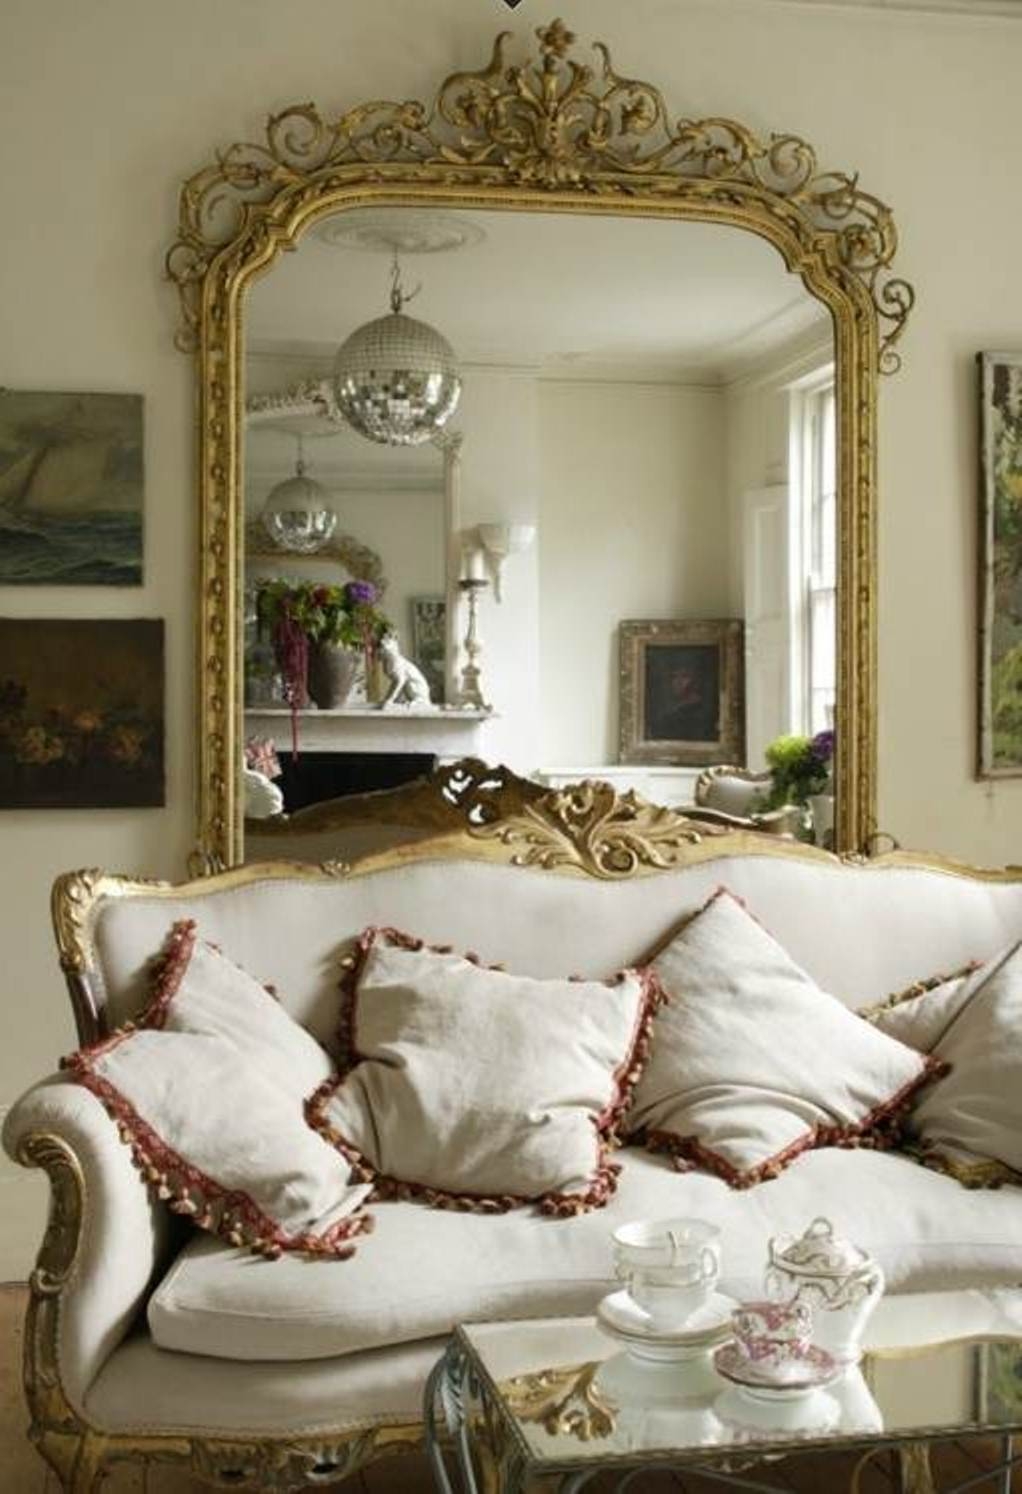 Buy Decorative Mirrors Online Large selection of Wall Mirrors